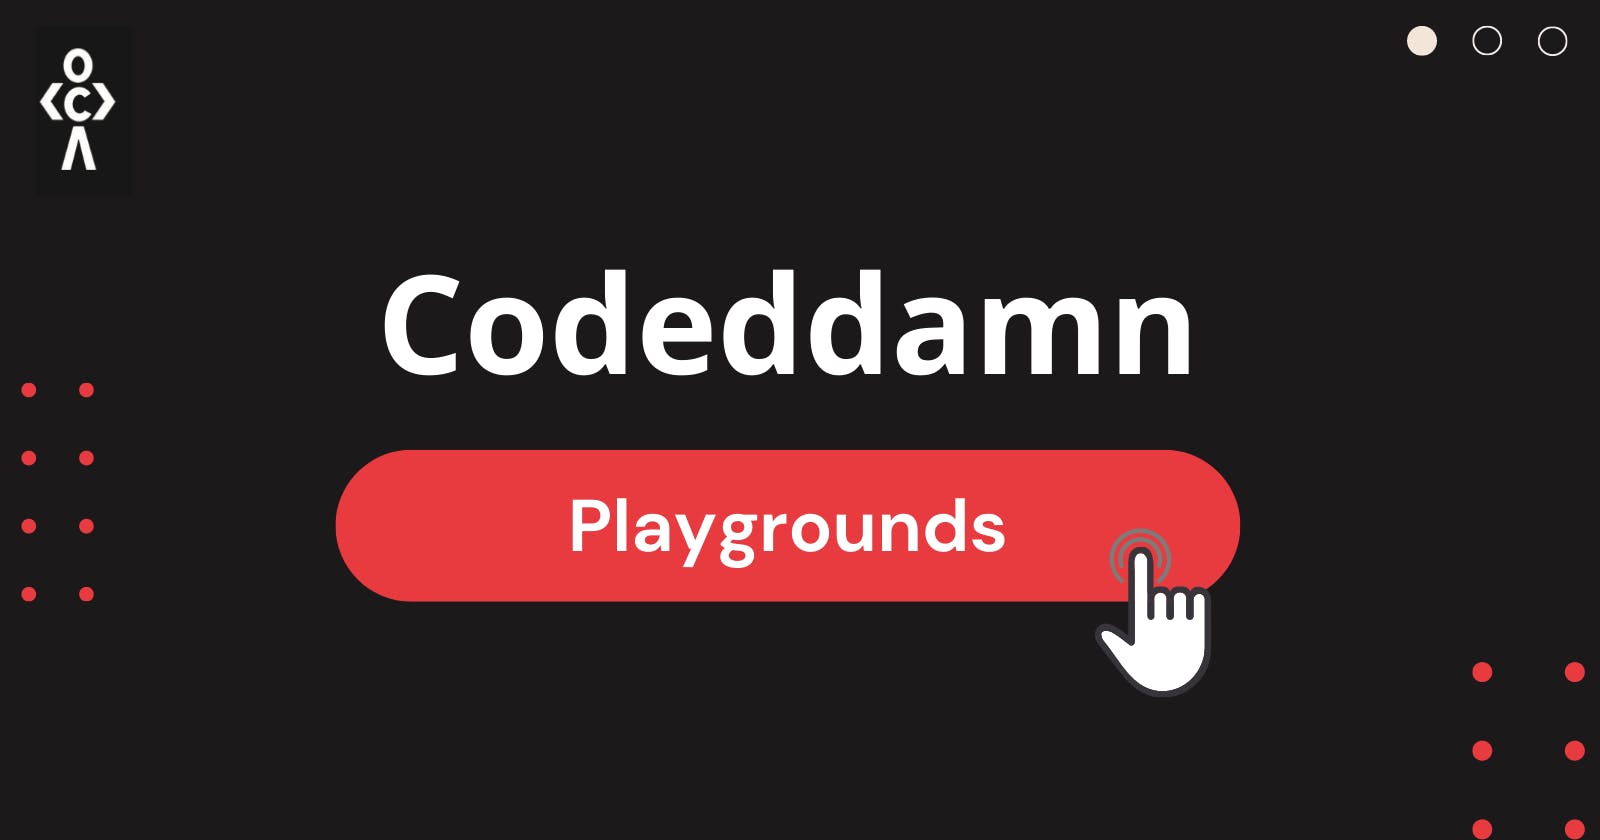 What Are Codedamn Playgrounds?